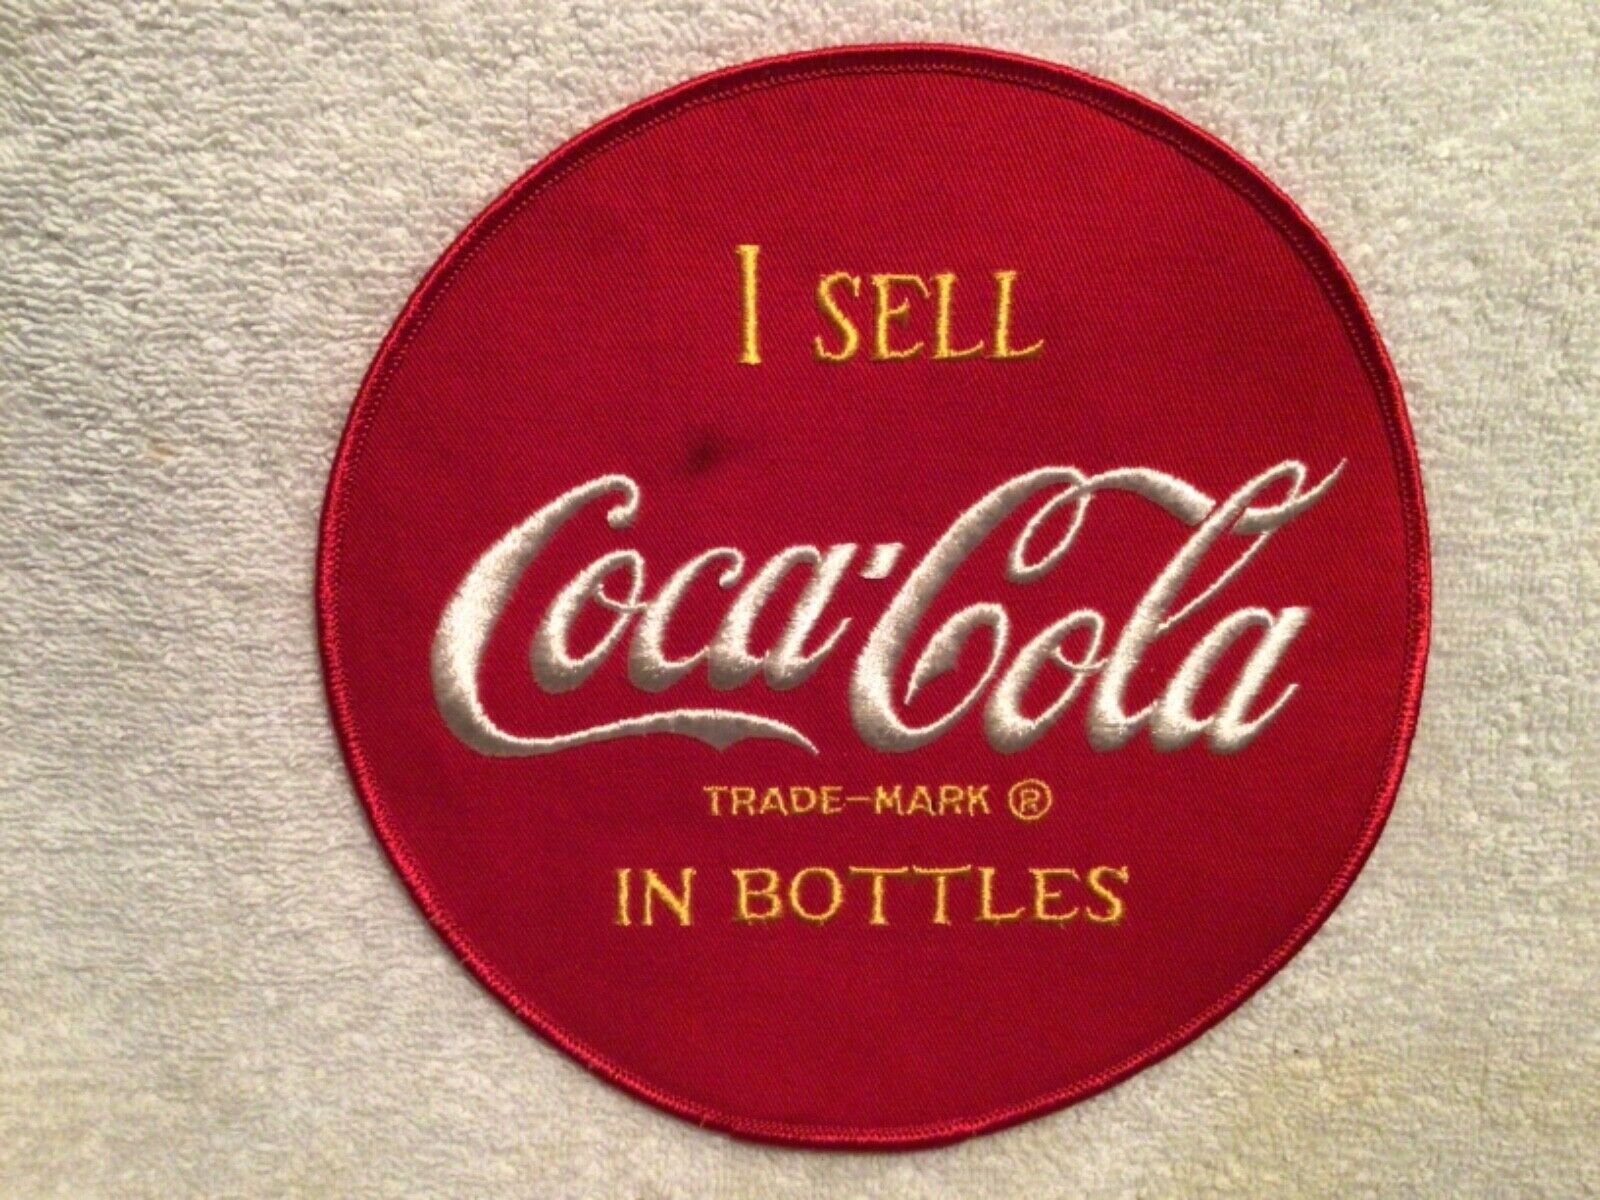 Vtg. Patch I Sell Coca-Cola In Bottles 7” Round Unused Salesman’s Jacket Red